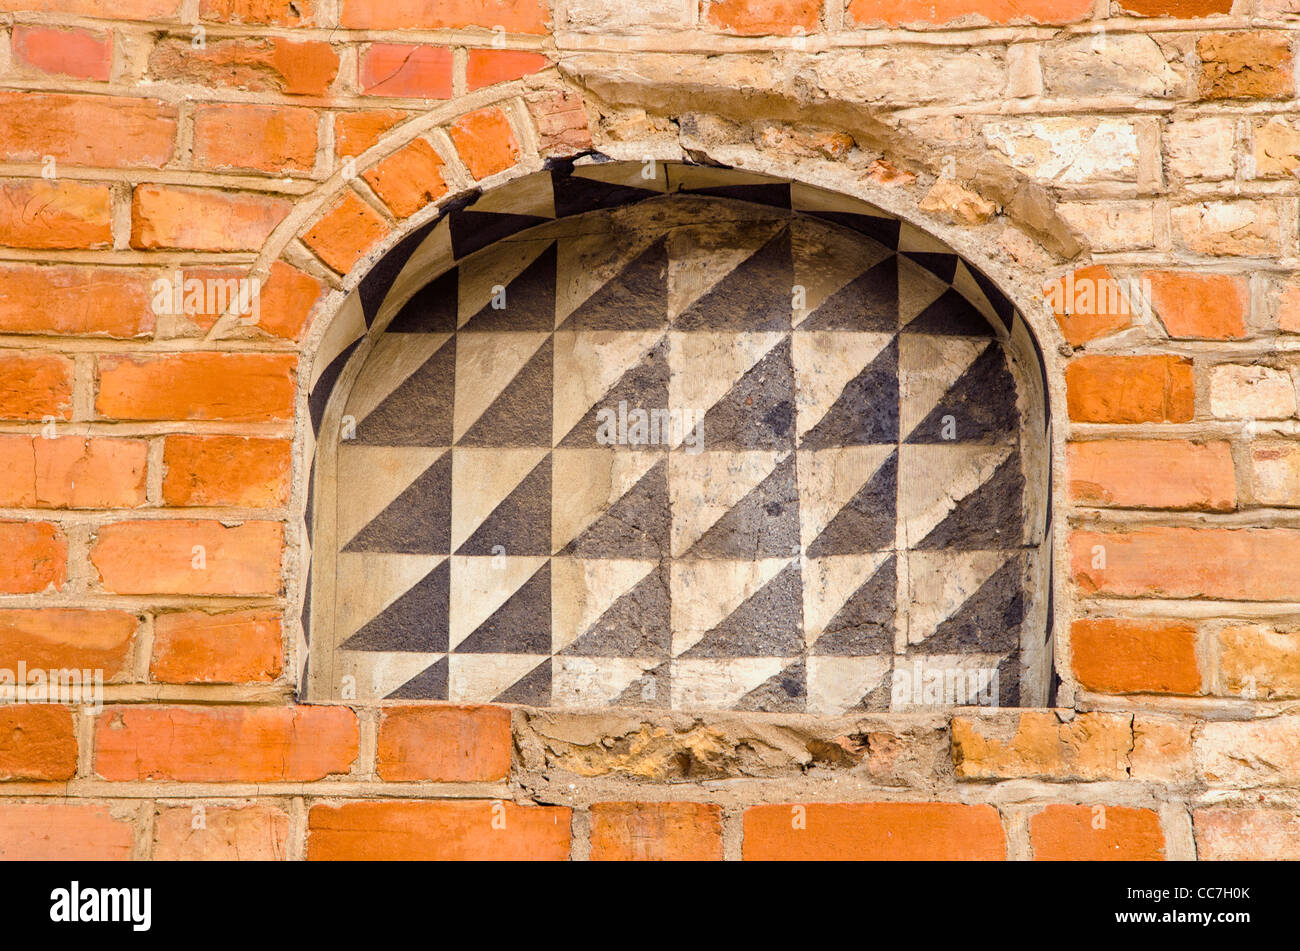 Abandoned building of red brick wall and arches background. Stock Photo